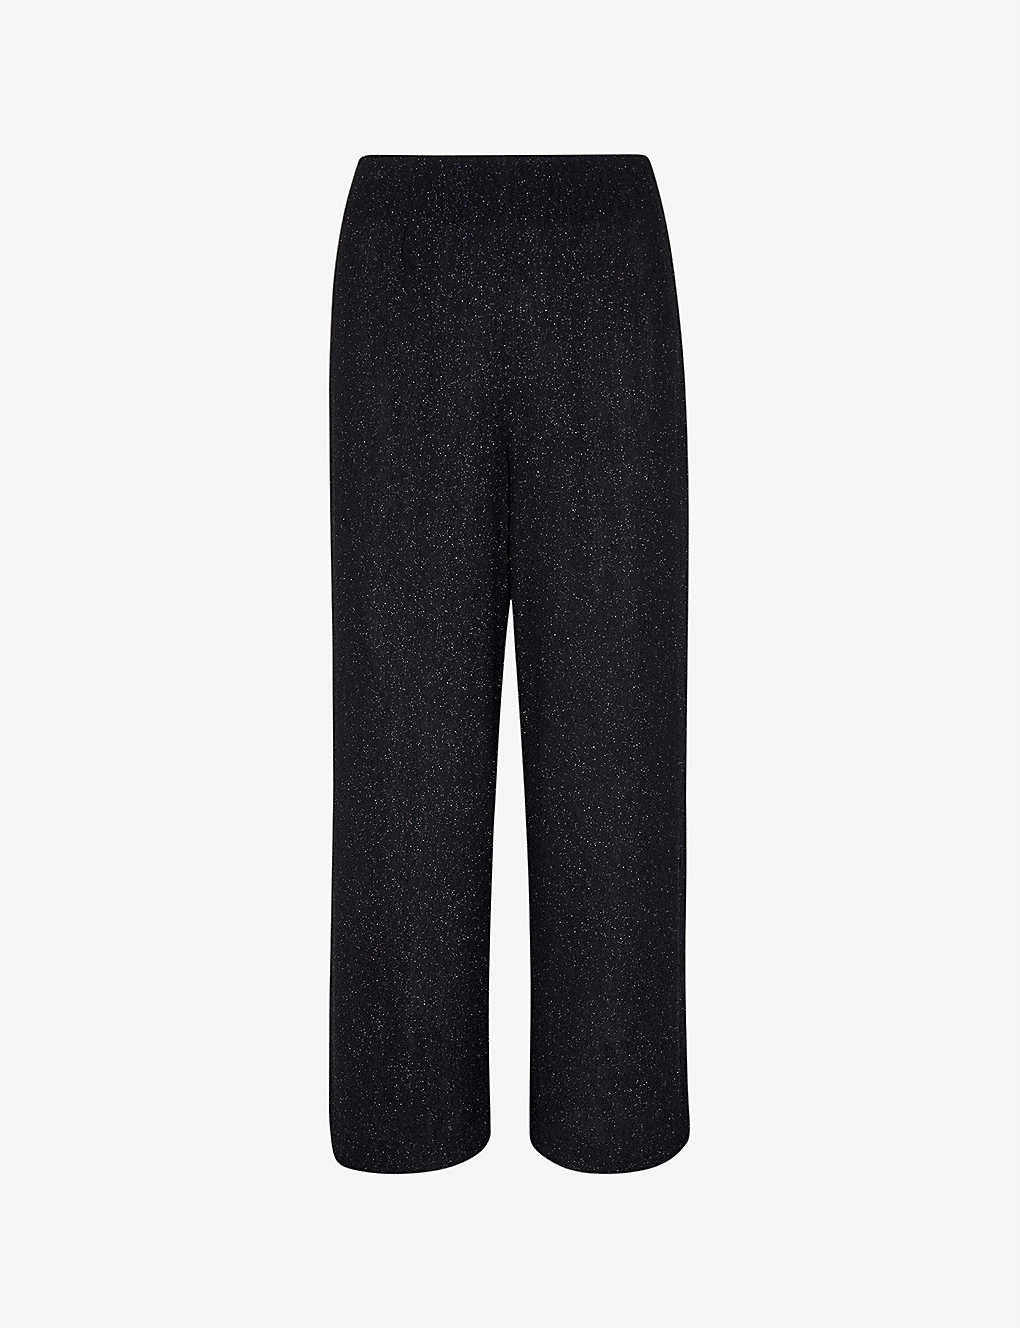 Whistles Womens Black Flared High-rise Metallic Stretch-woven Trousers